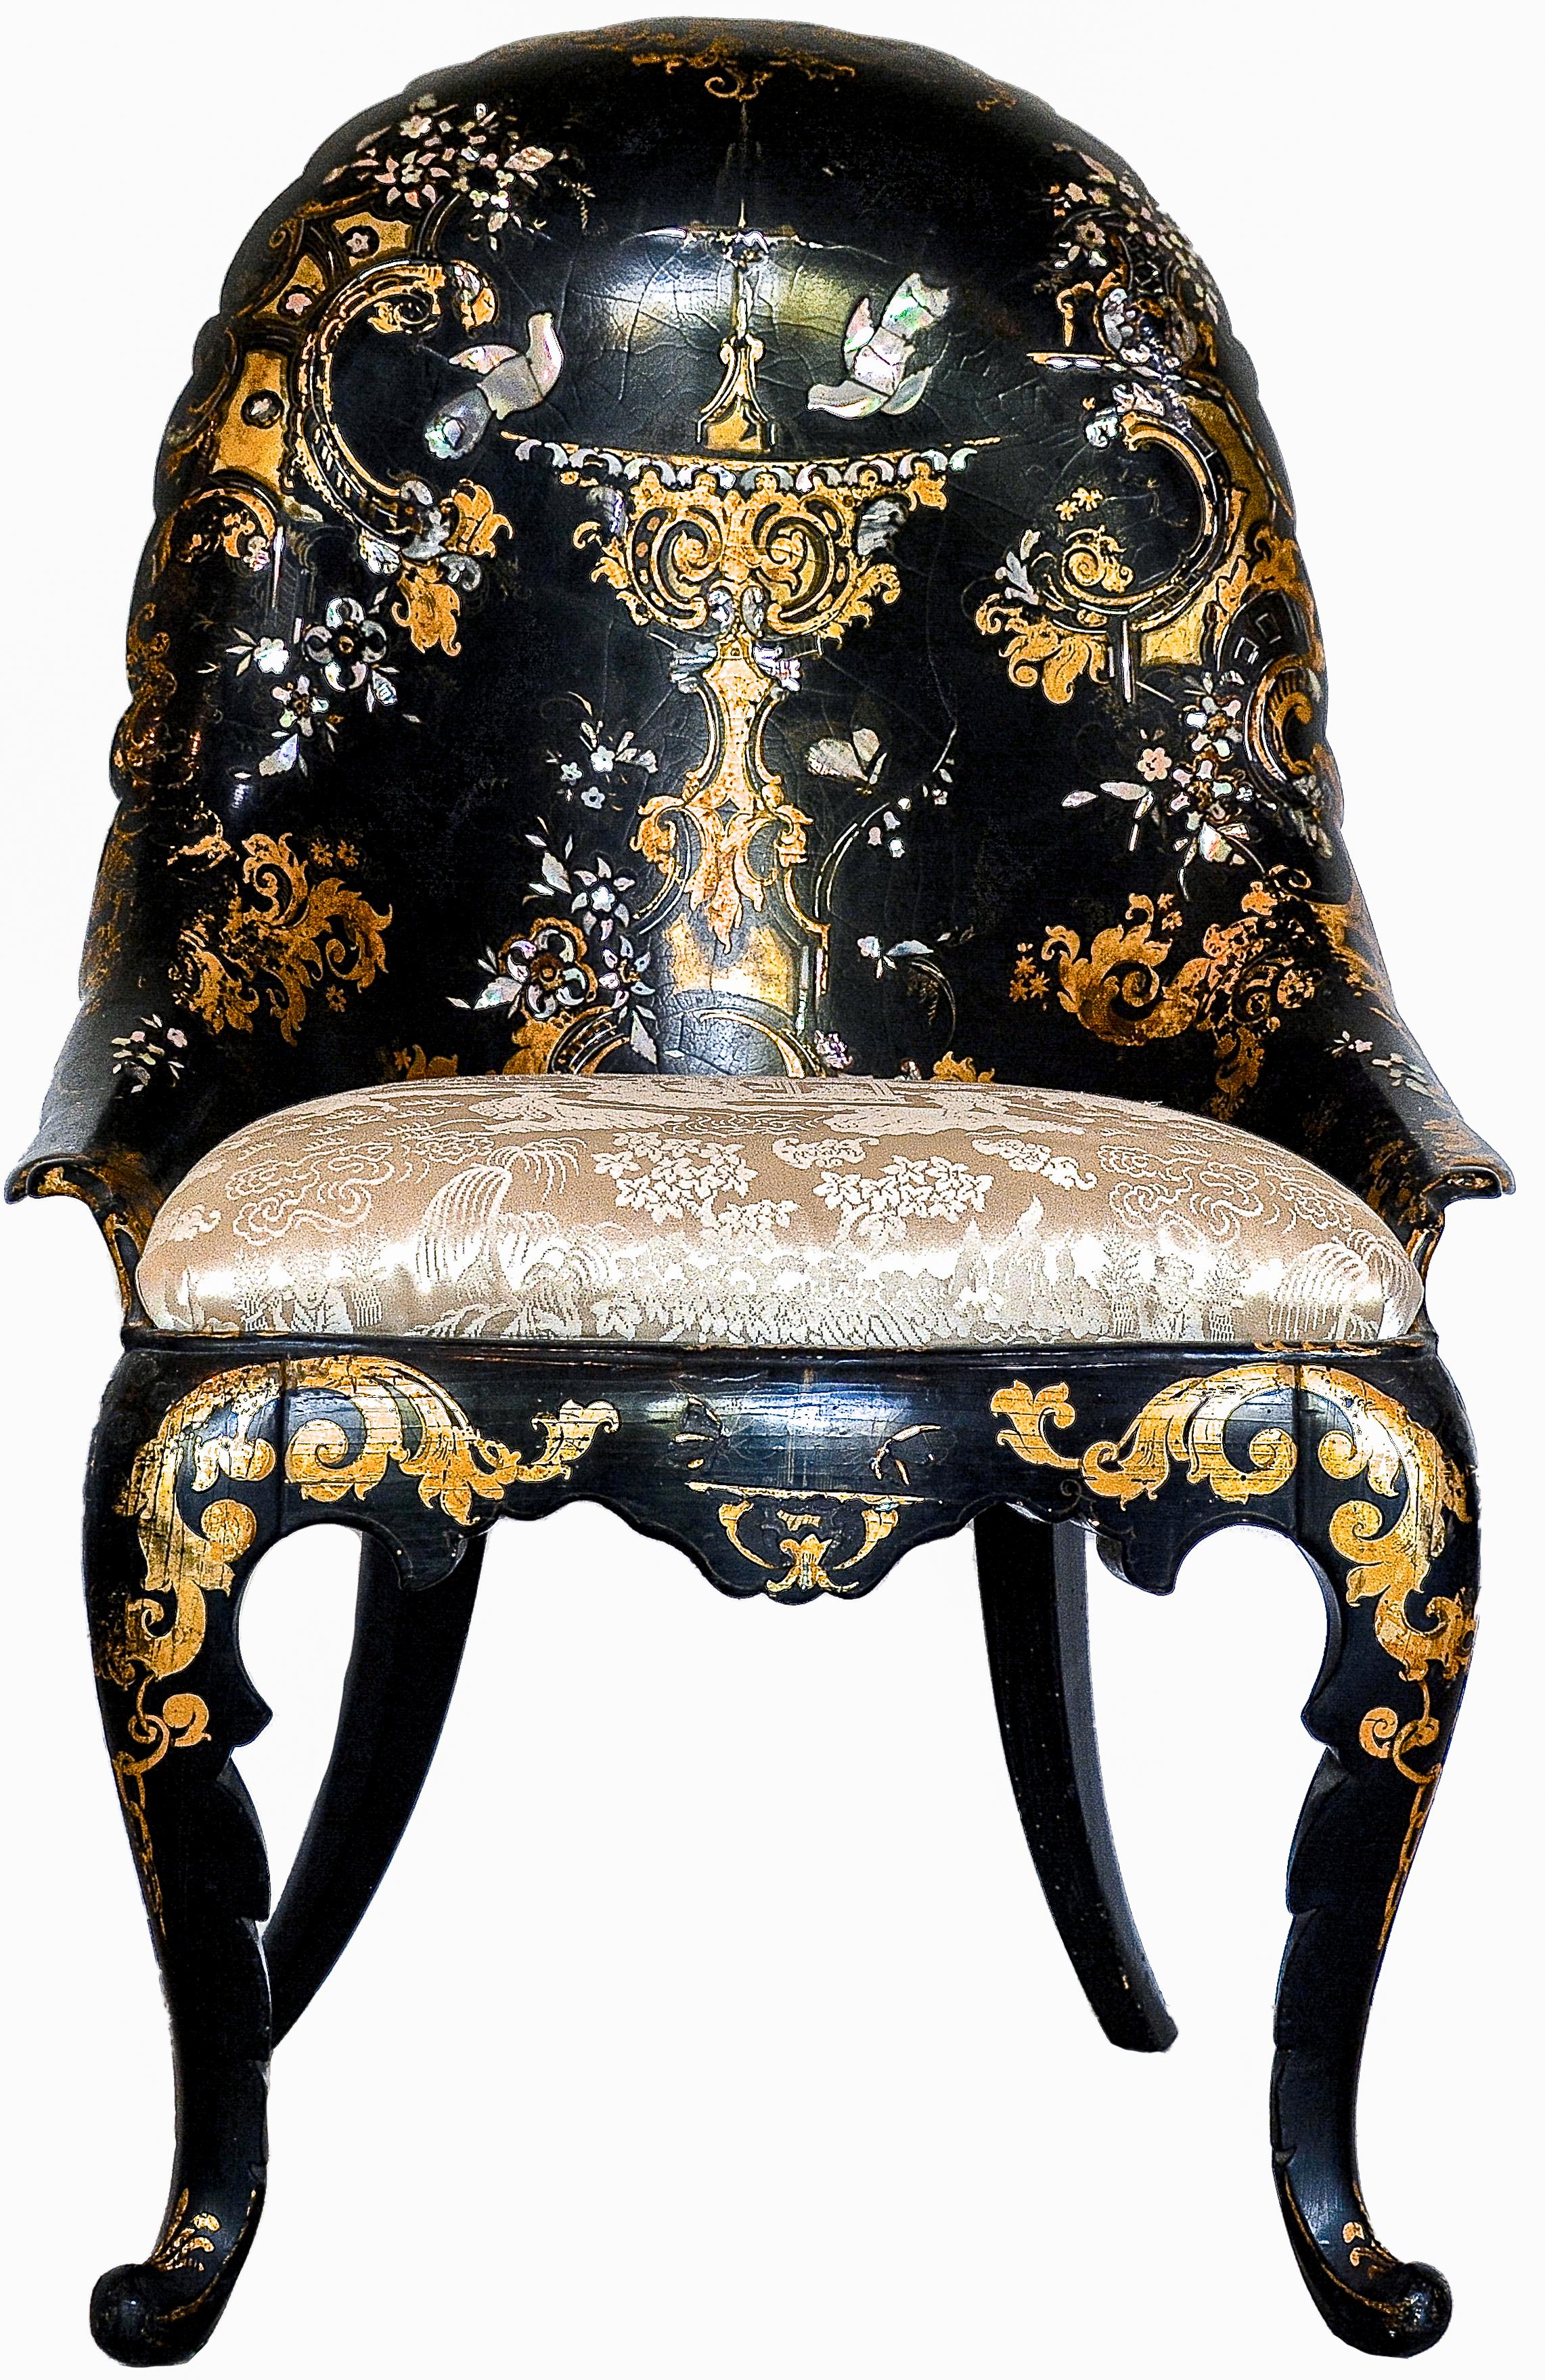 19th Century Victorian Inlaid Mother-of-Pearl & Gold Leaf Papier Mache Chair For Sale 8